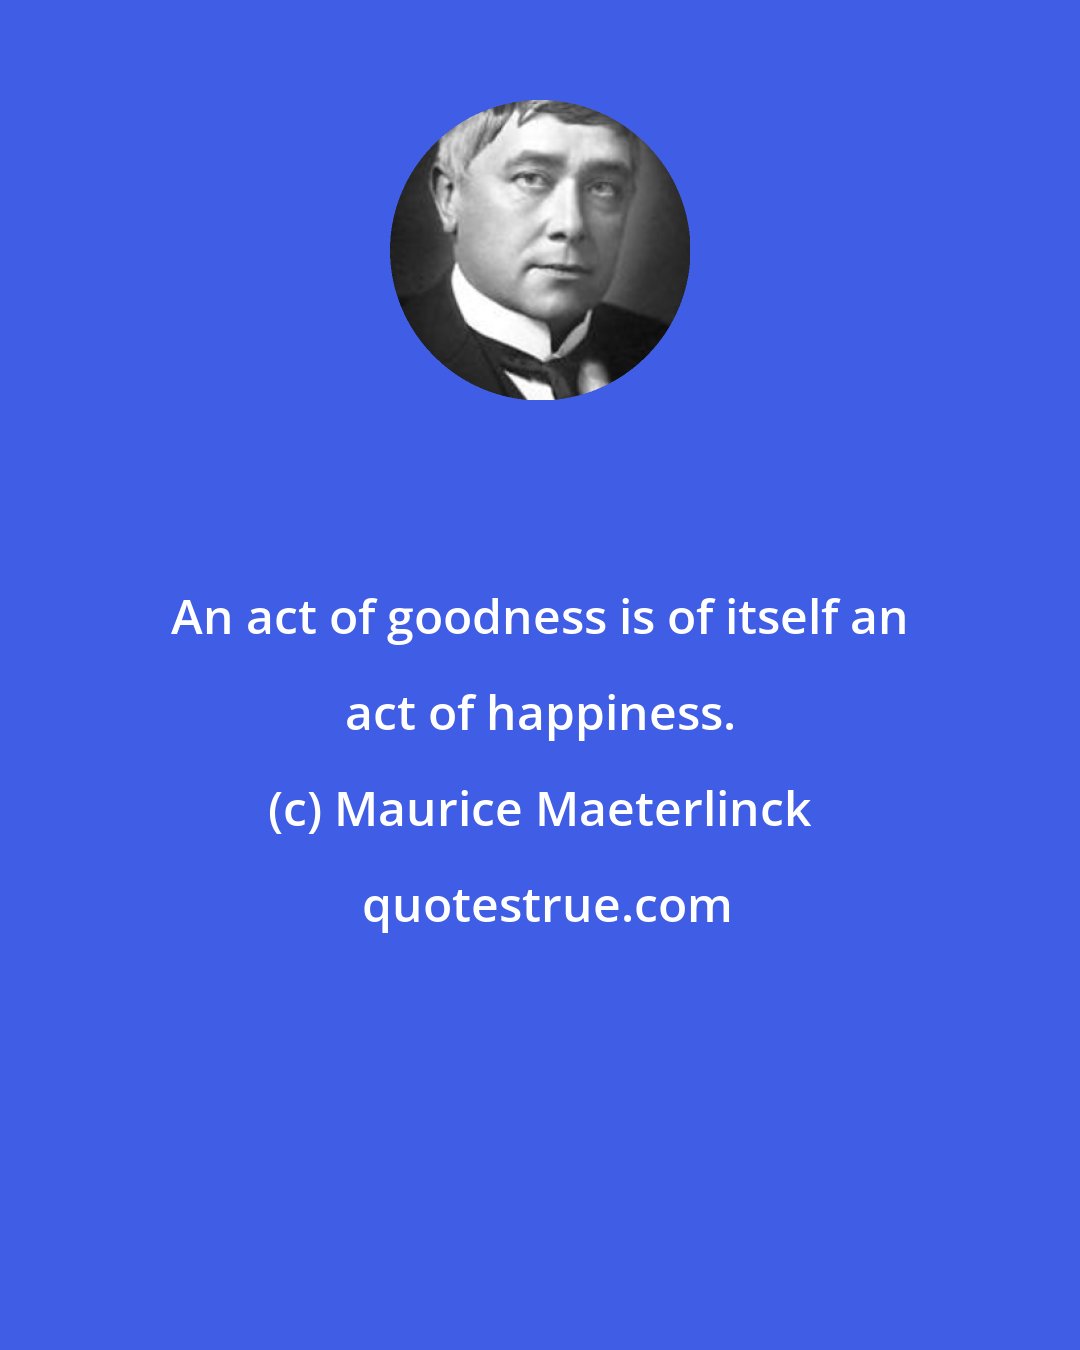 Maurice Maeterlinck: An act of goodness is of itself an act of happiness.